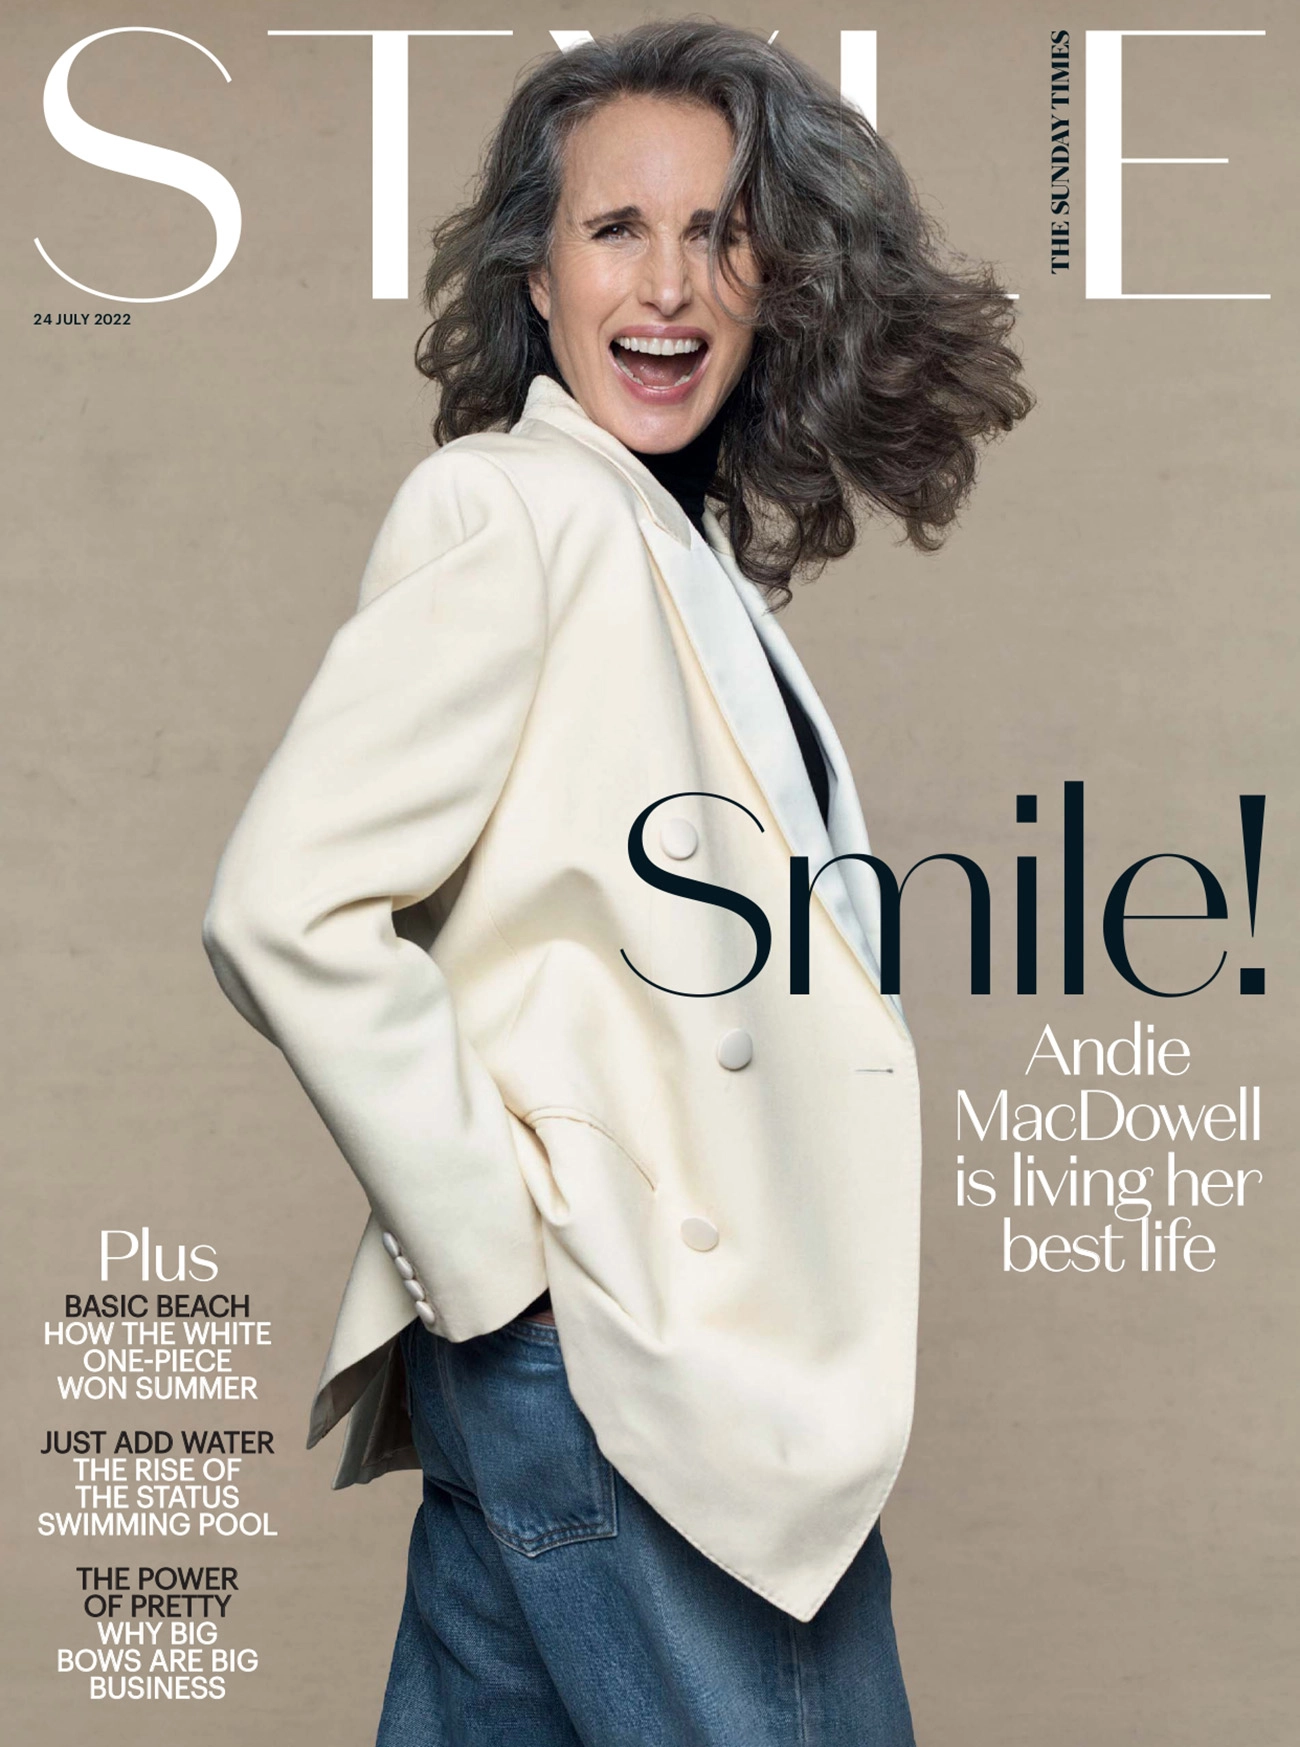 Andie MacDowell covers The Sunday Times Style July 24th, 2022 by Craig McDean